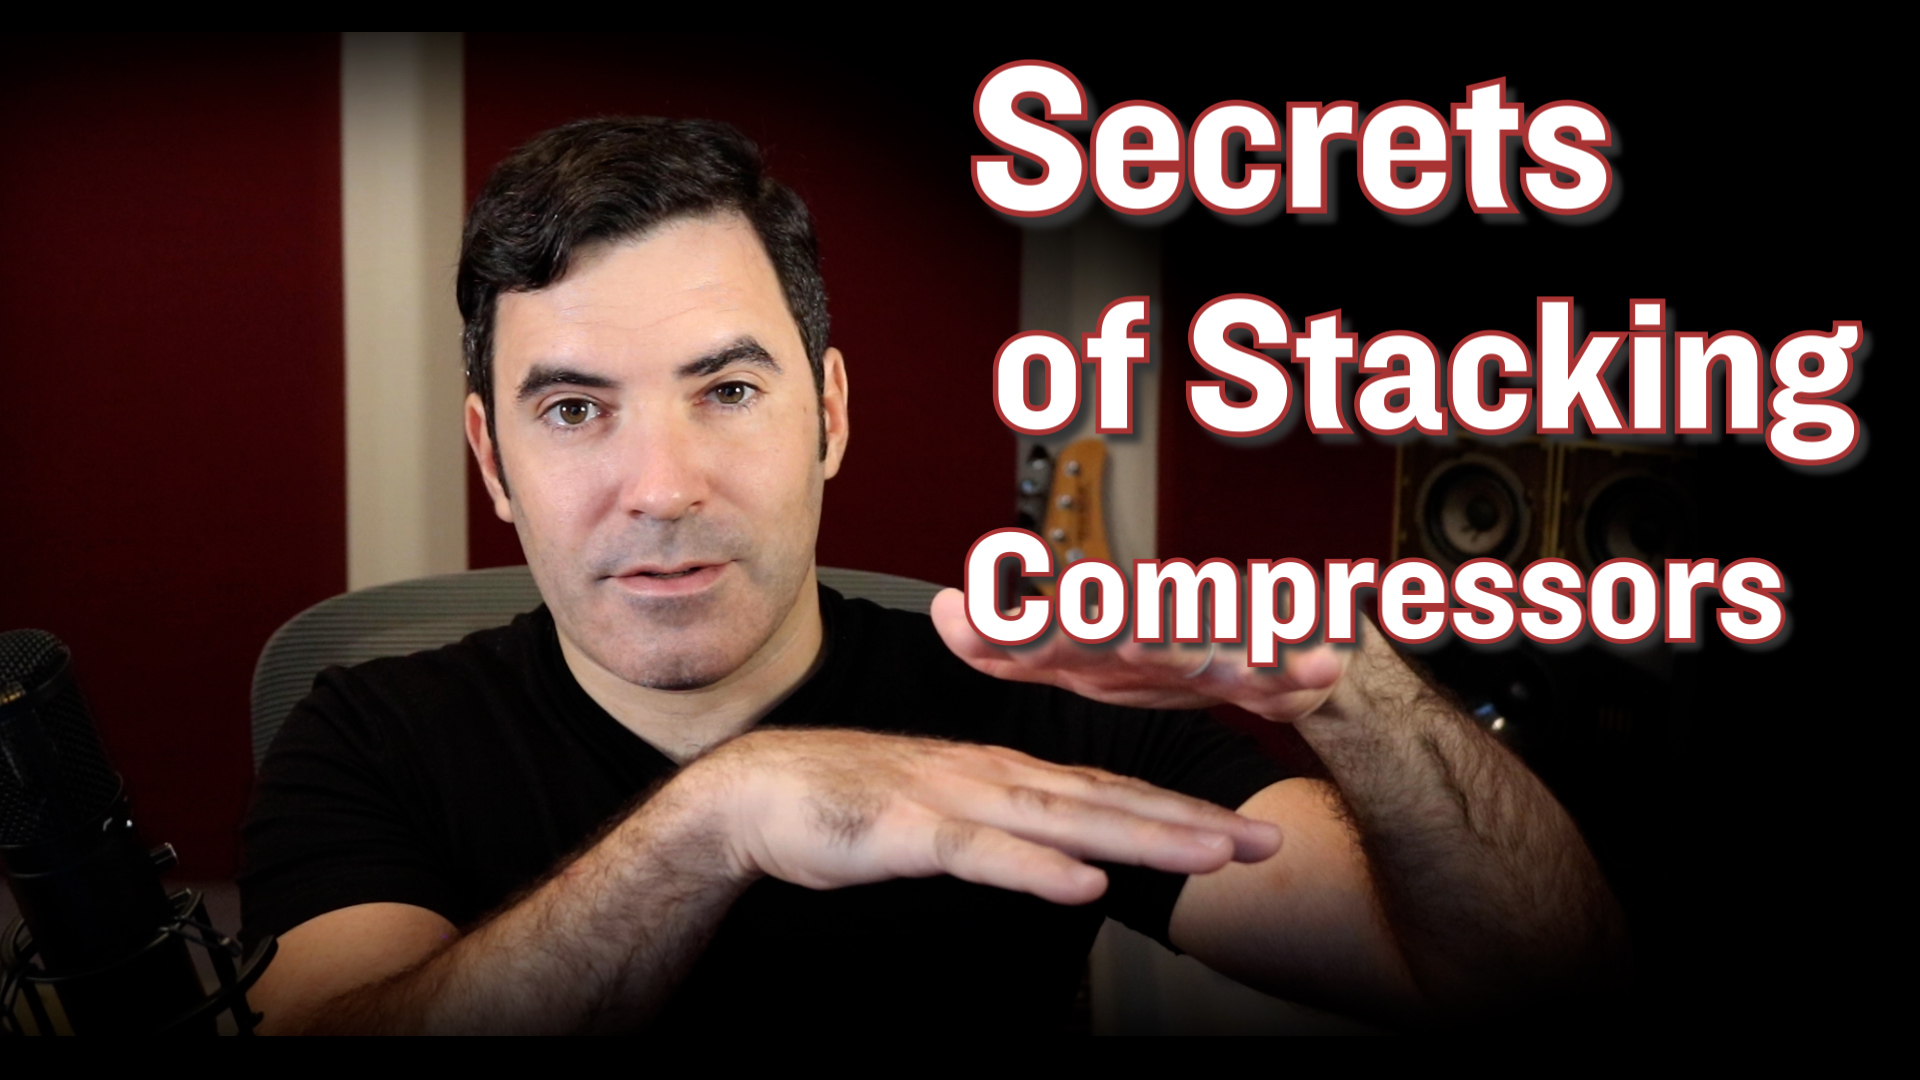 The Secret Science of Stacking Compressors